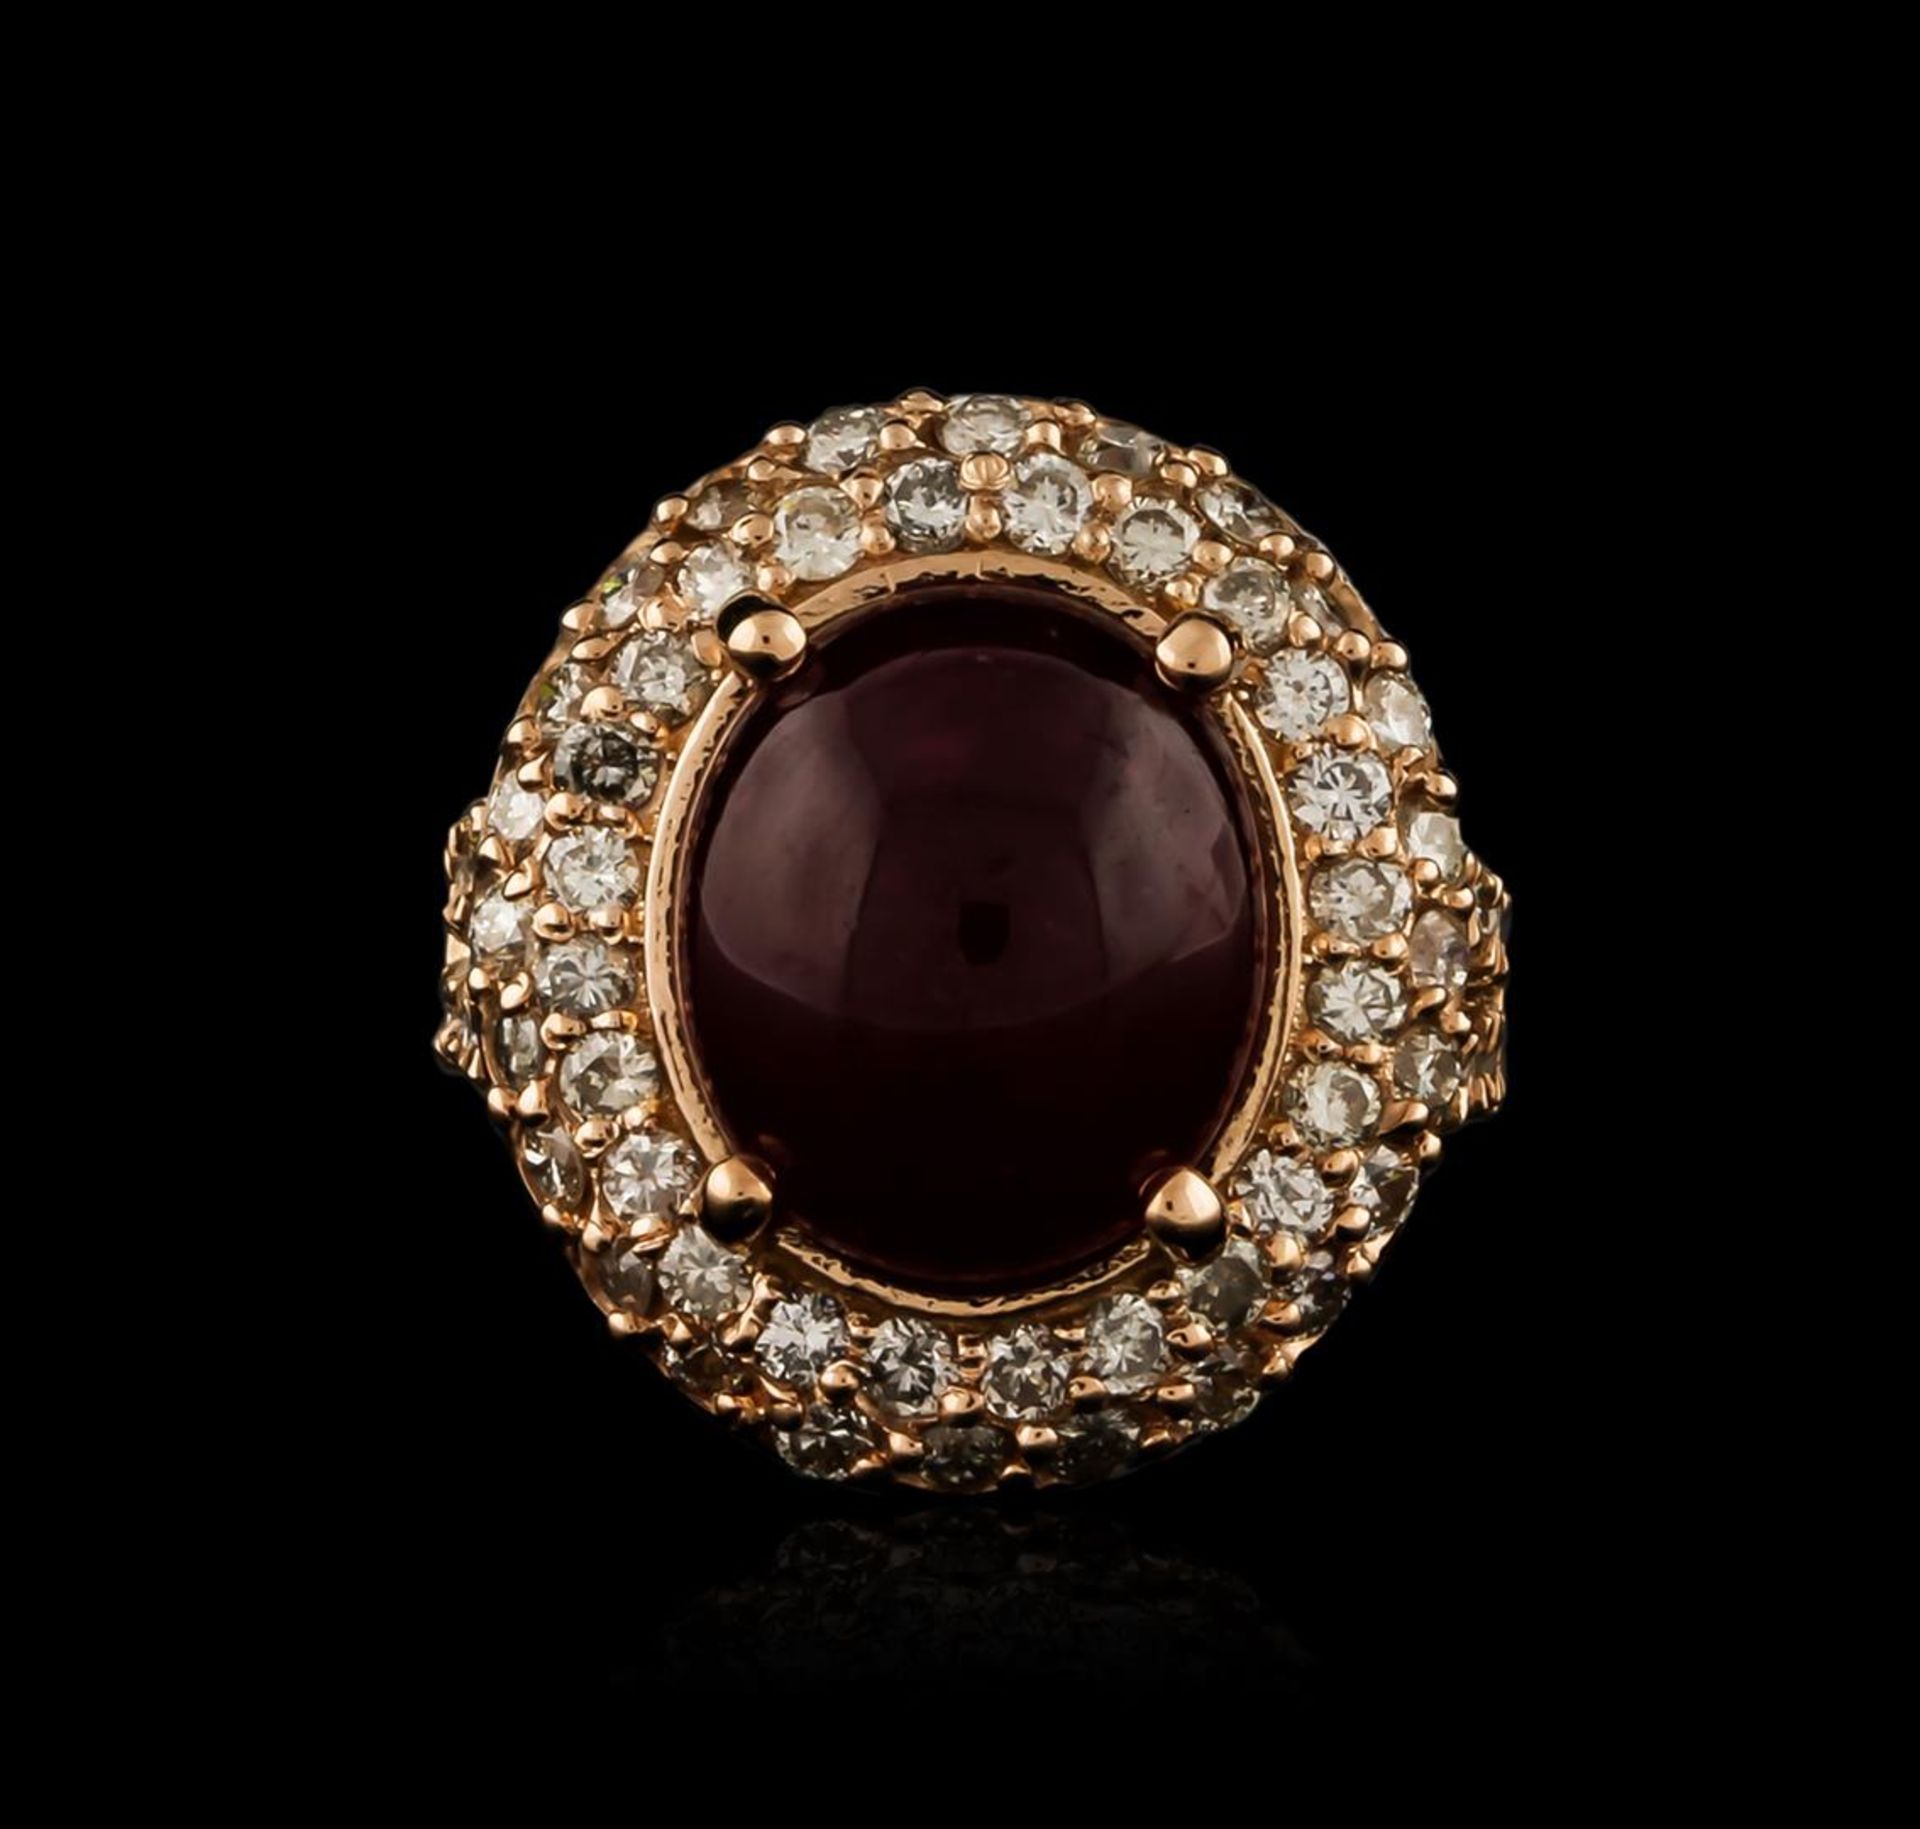 14KT Rose Gold 10.69 ctw Ruby and Diamond Ring - Image 2 of 5